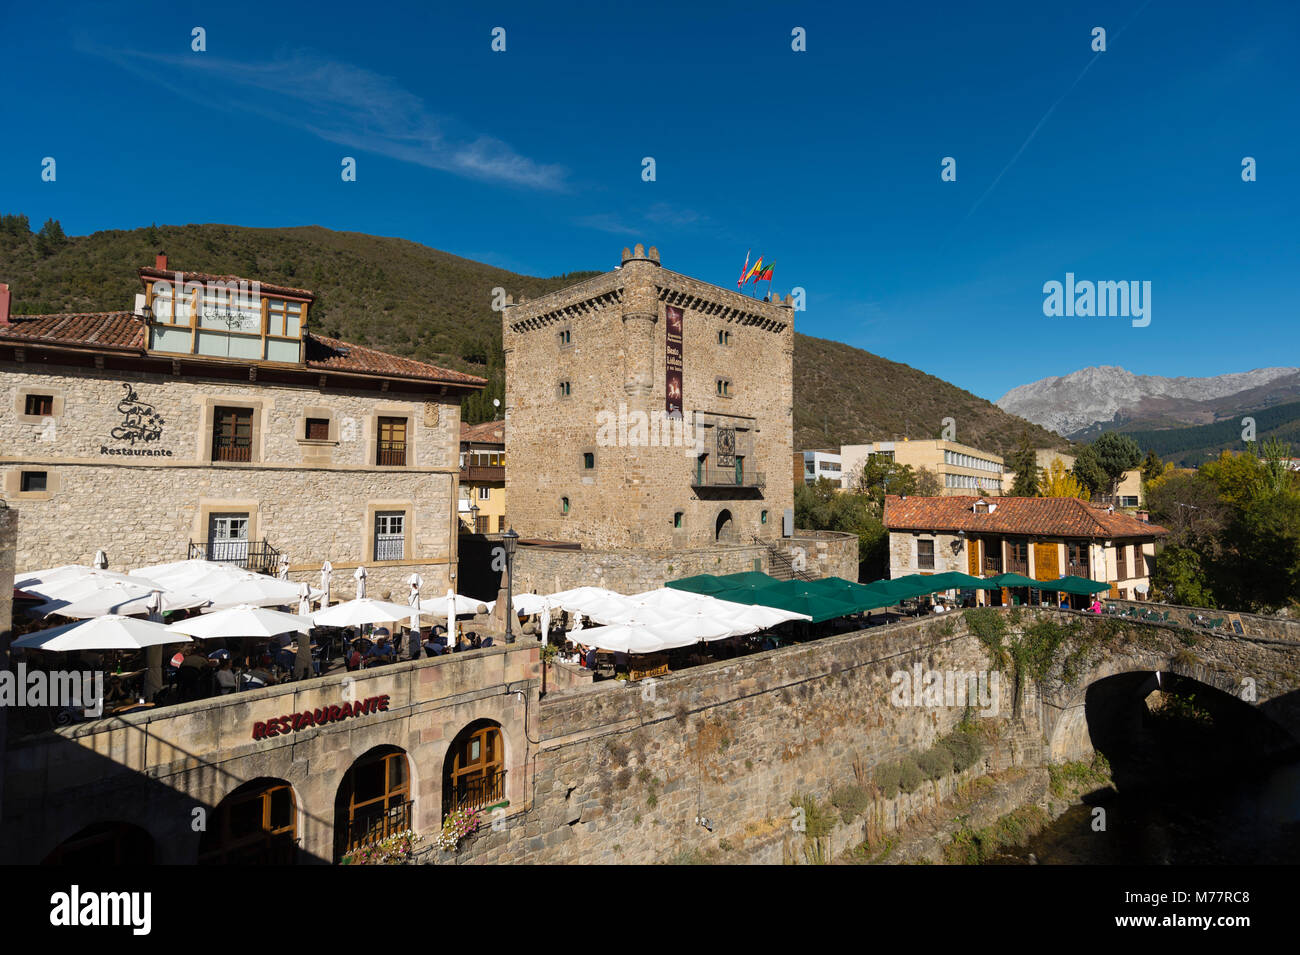 Potes, Cantabria, Spain, Europe Banque D'Images